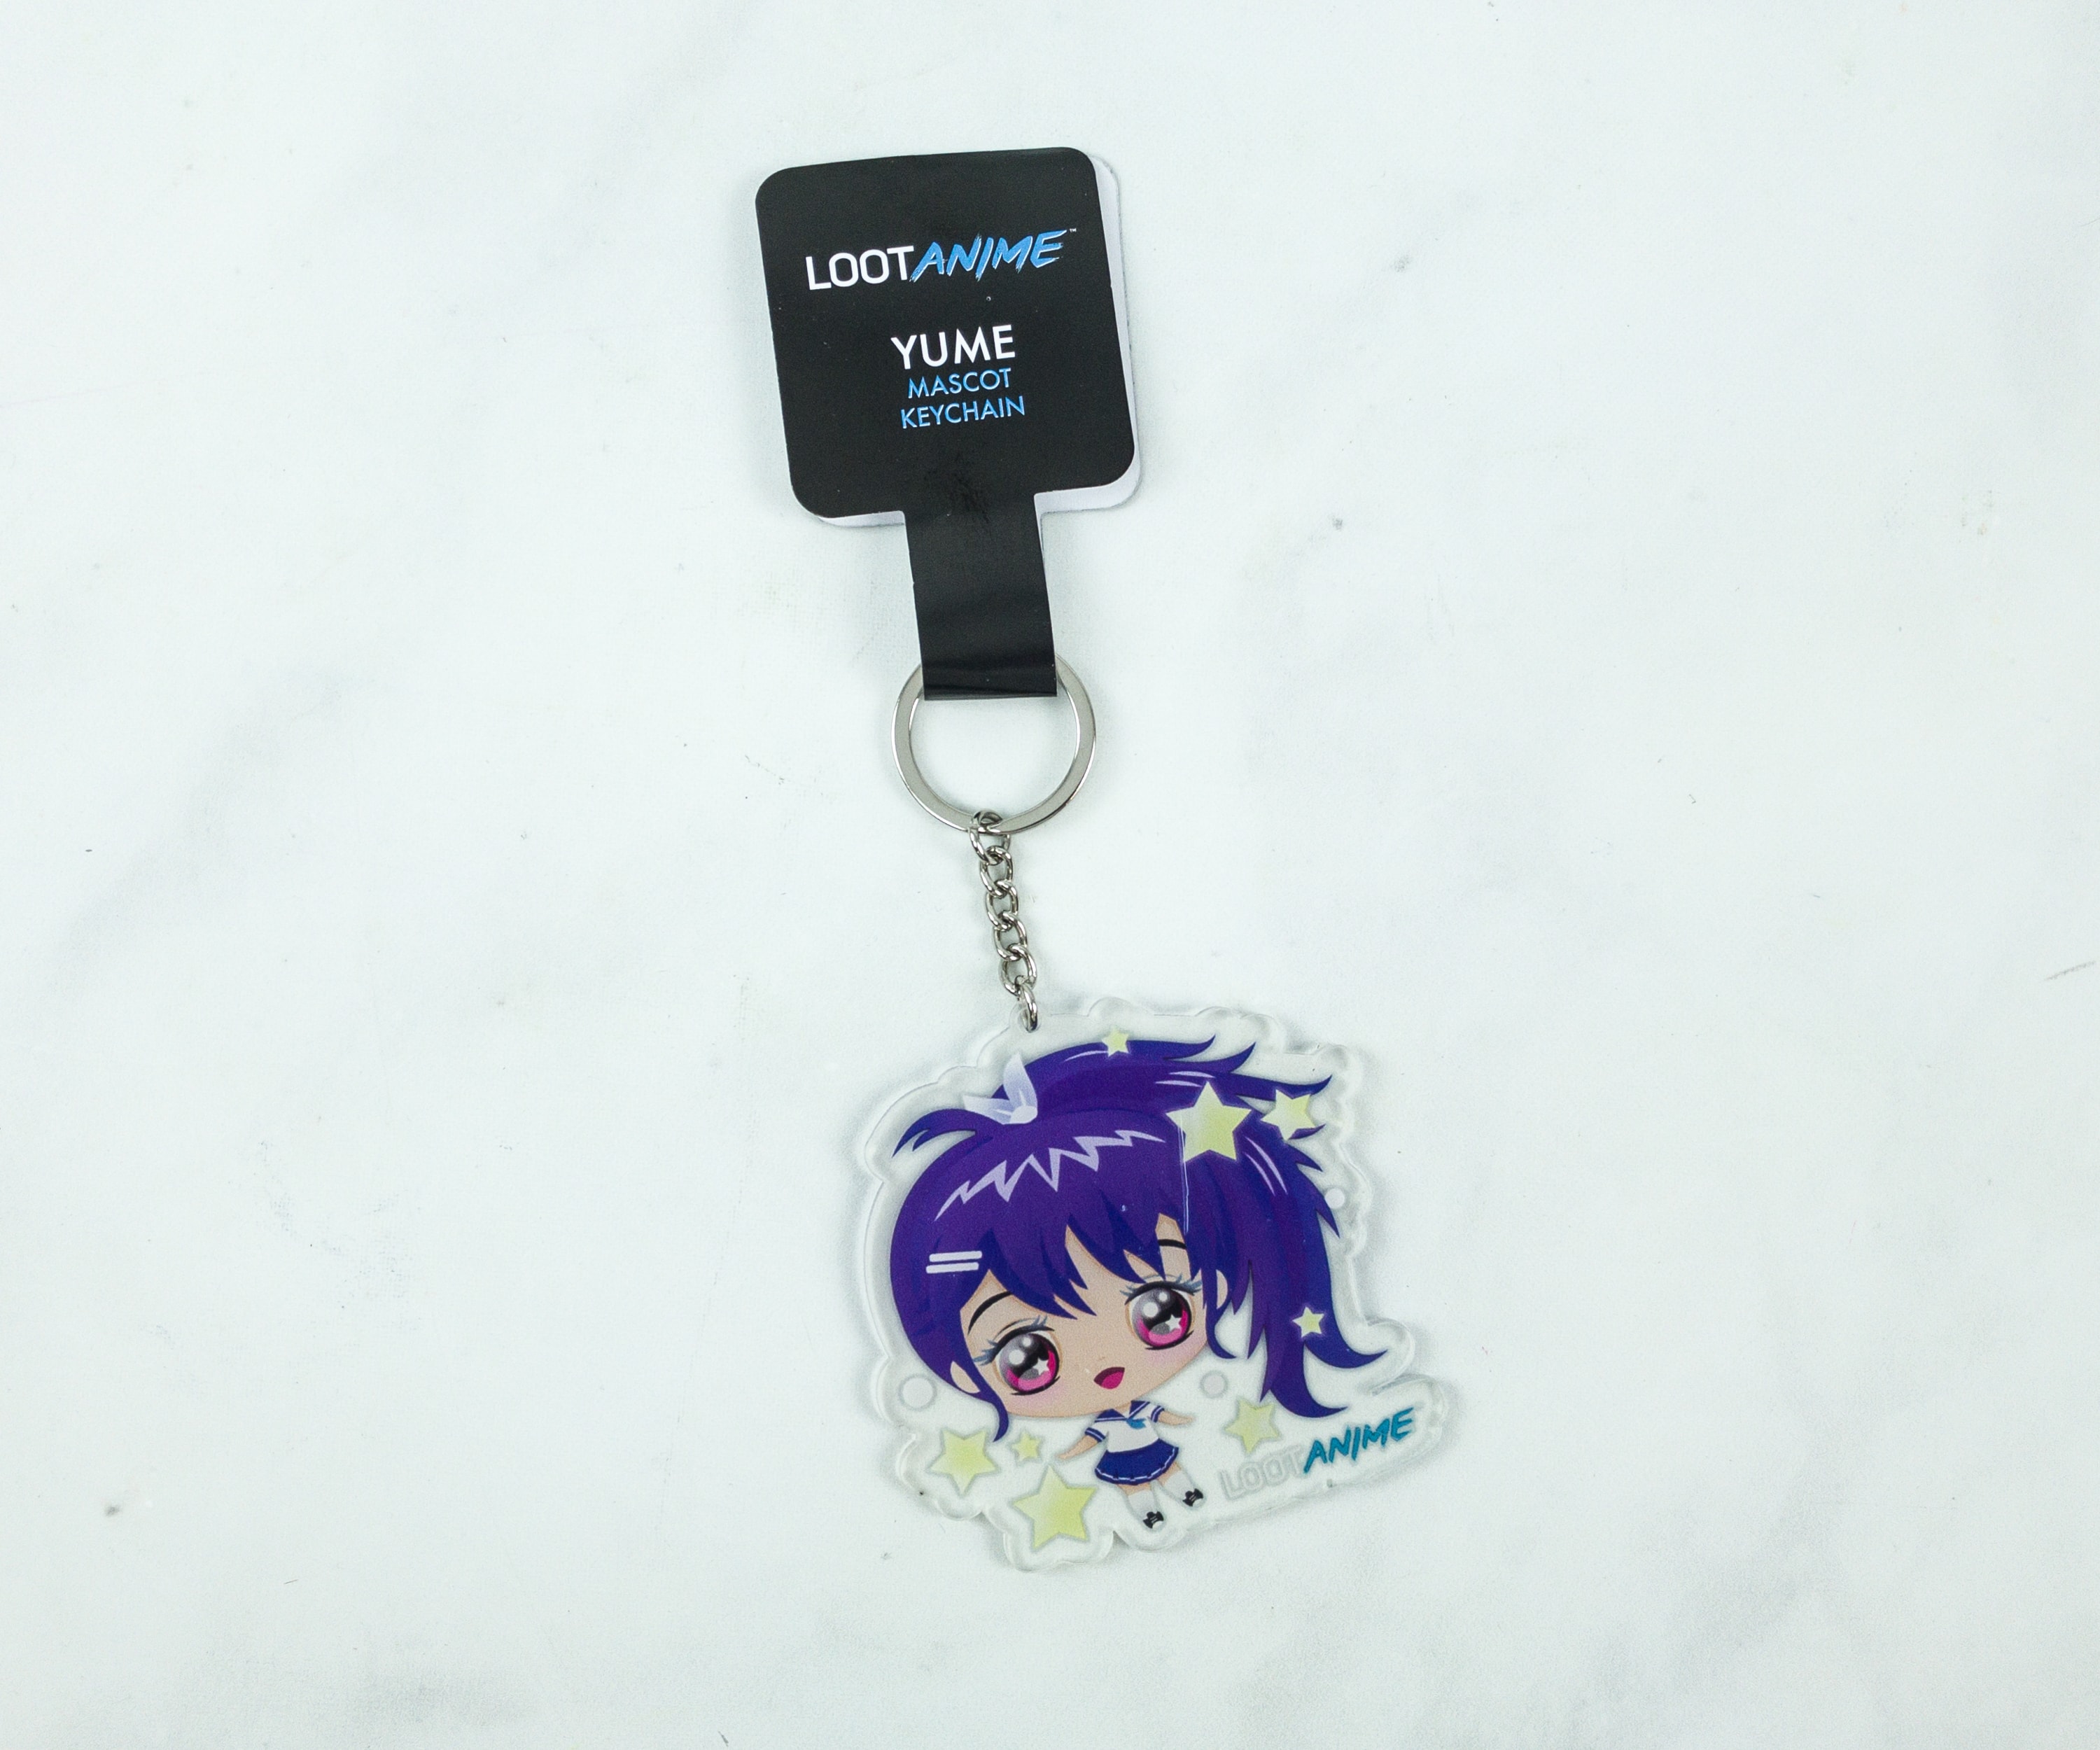 Yume's Kitty Nyah ACTION COMEDY Phone Charm Loot Anime Crate August 2017 